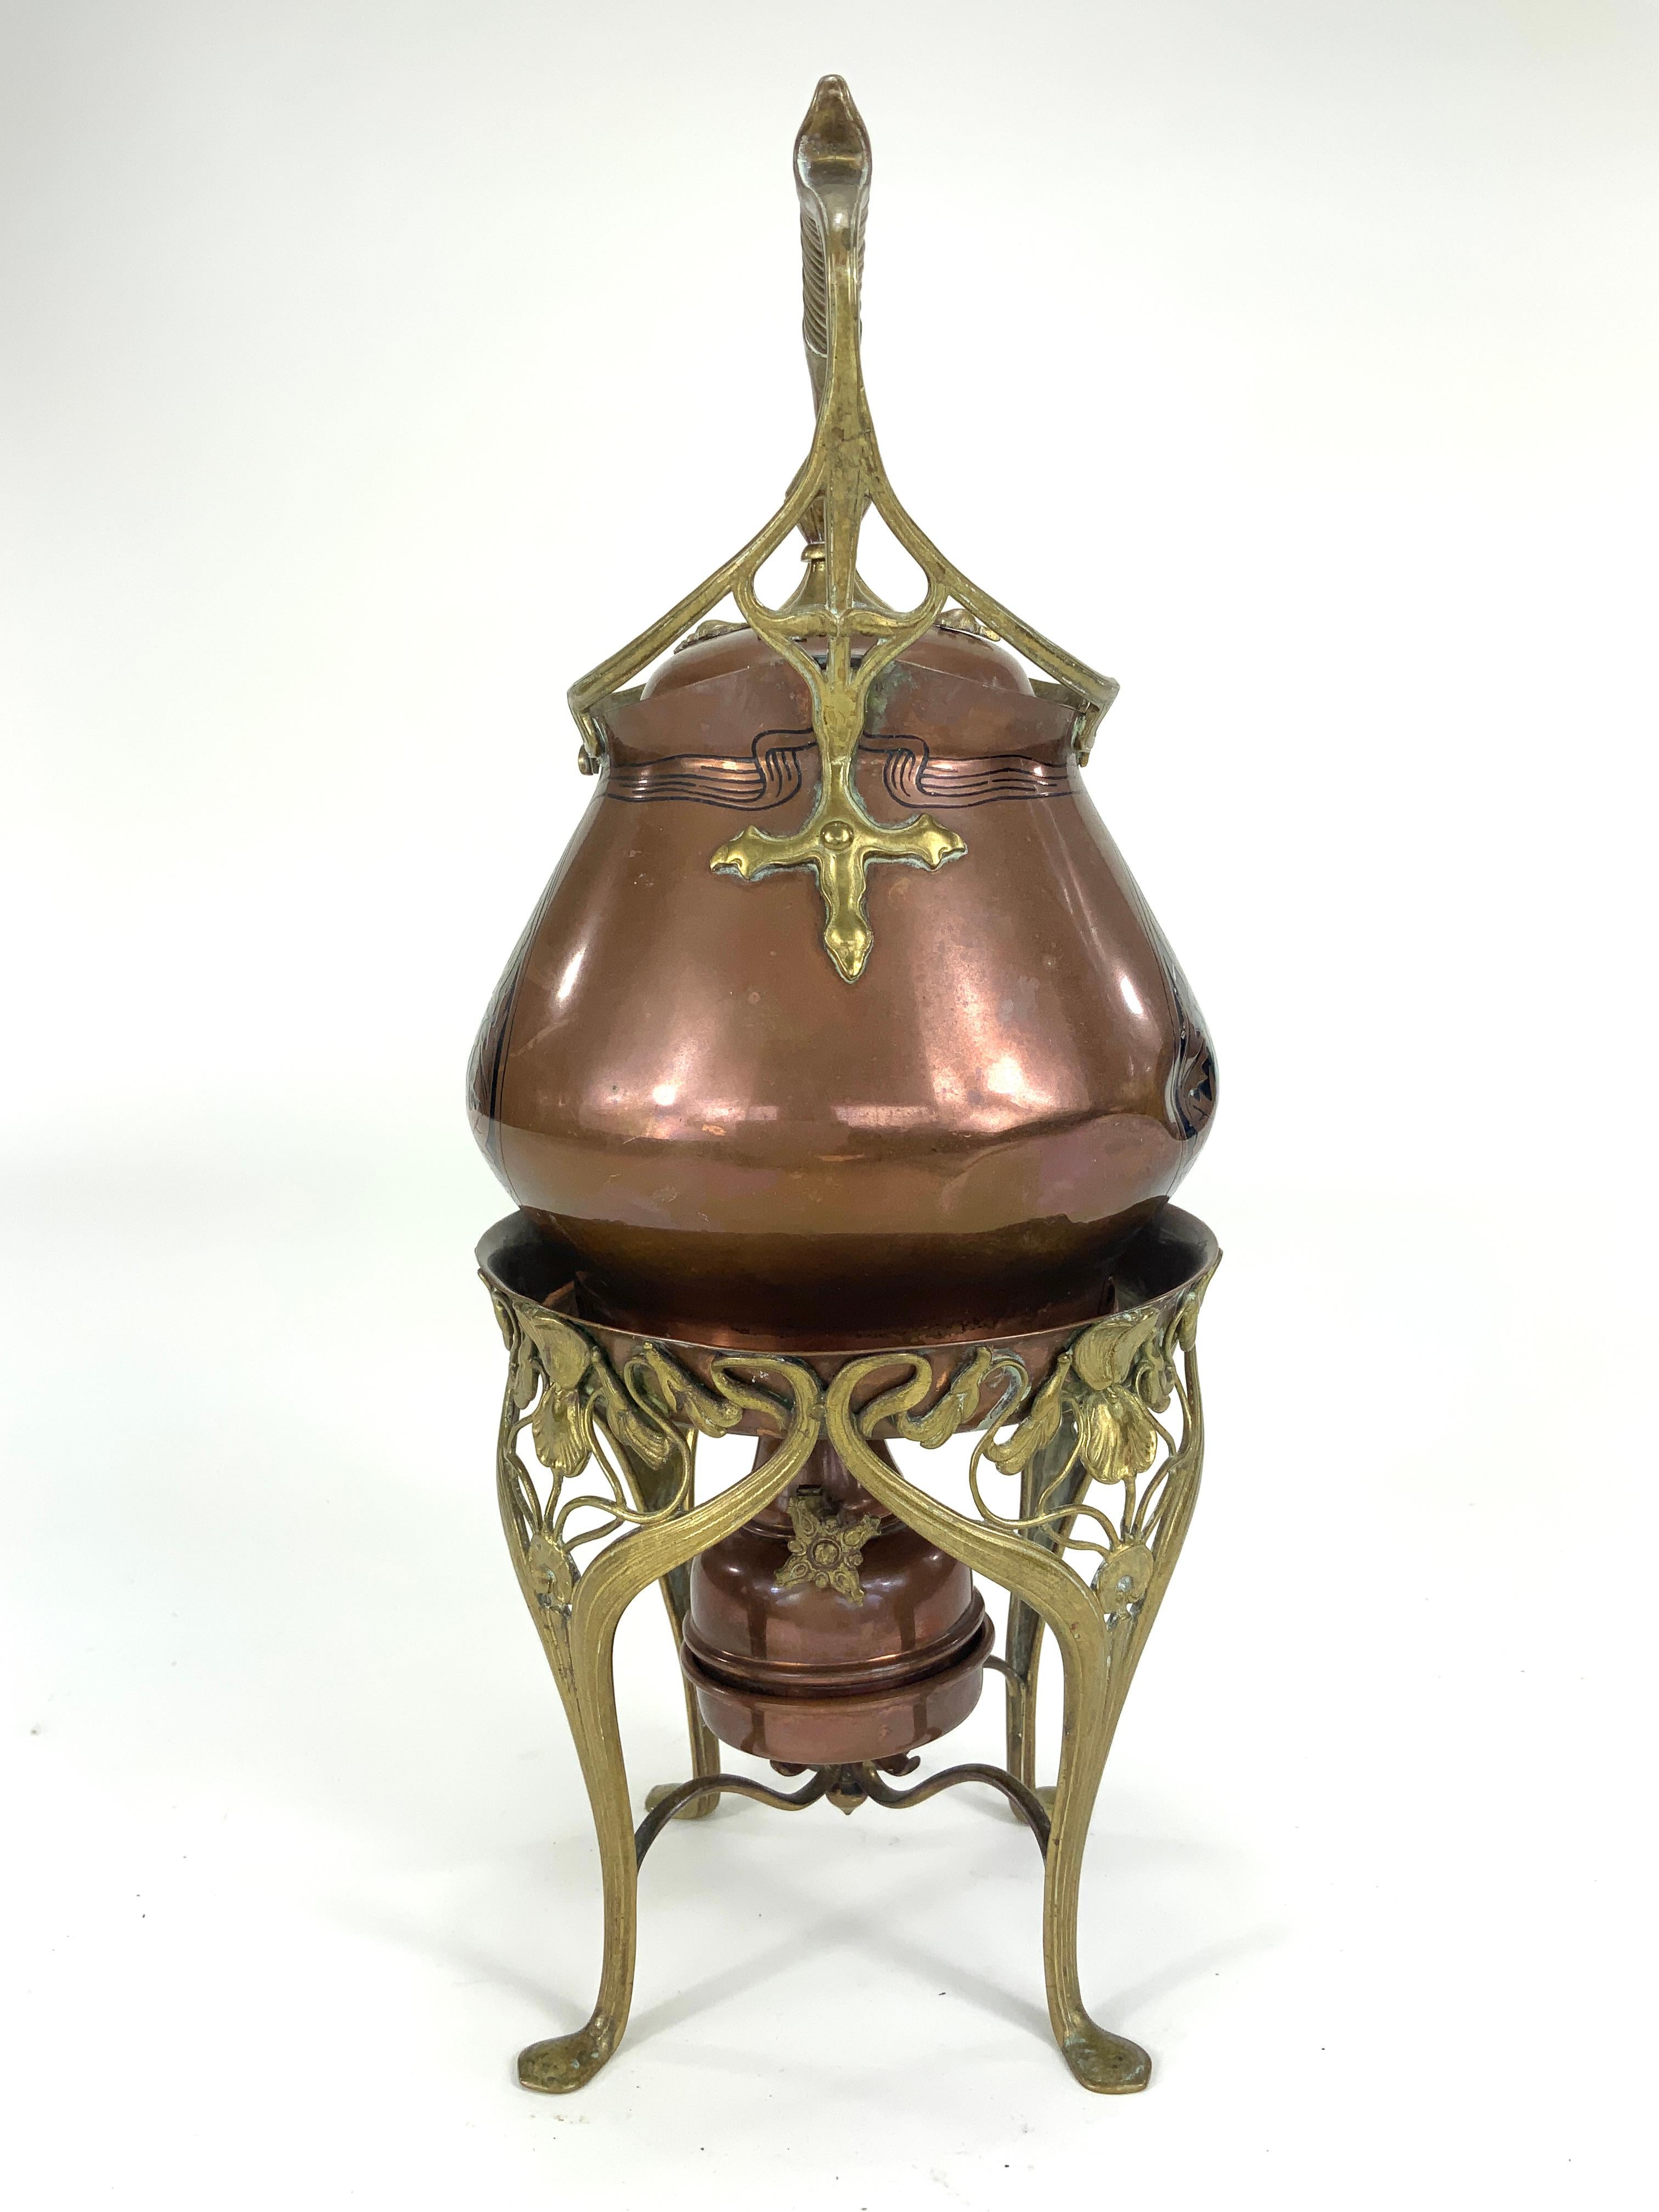 Carl Deffner (1856-1946) Art Nouveau Copper Tea Kettle on a Comfort circa 1895-1900, Germany.

This Carl Deffner teapot on a conforming stand with a spirit burner, circa 1895-1900 was made during the height of the Art Nouveau era. The pot is